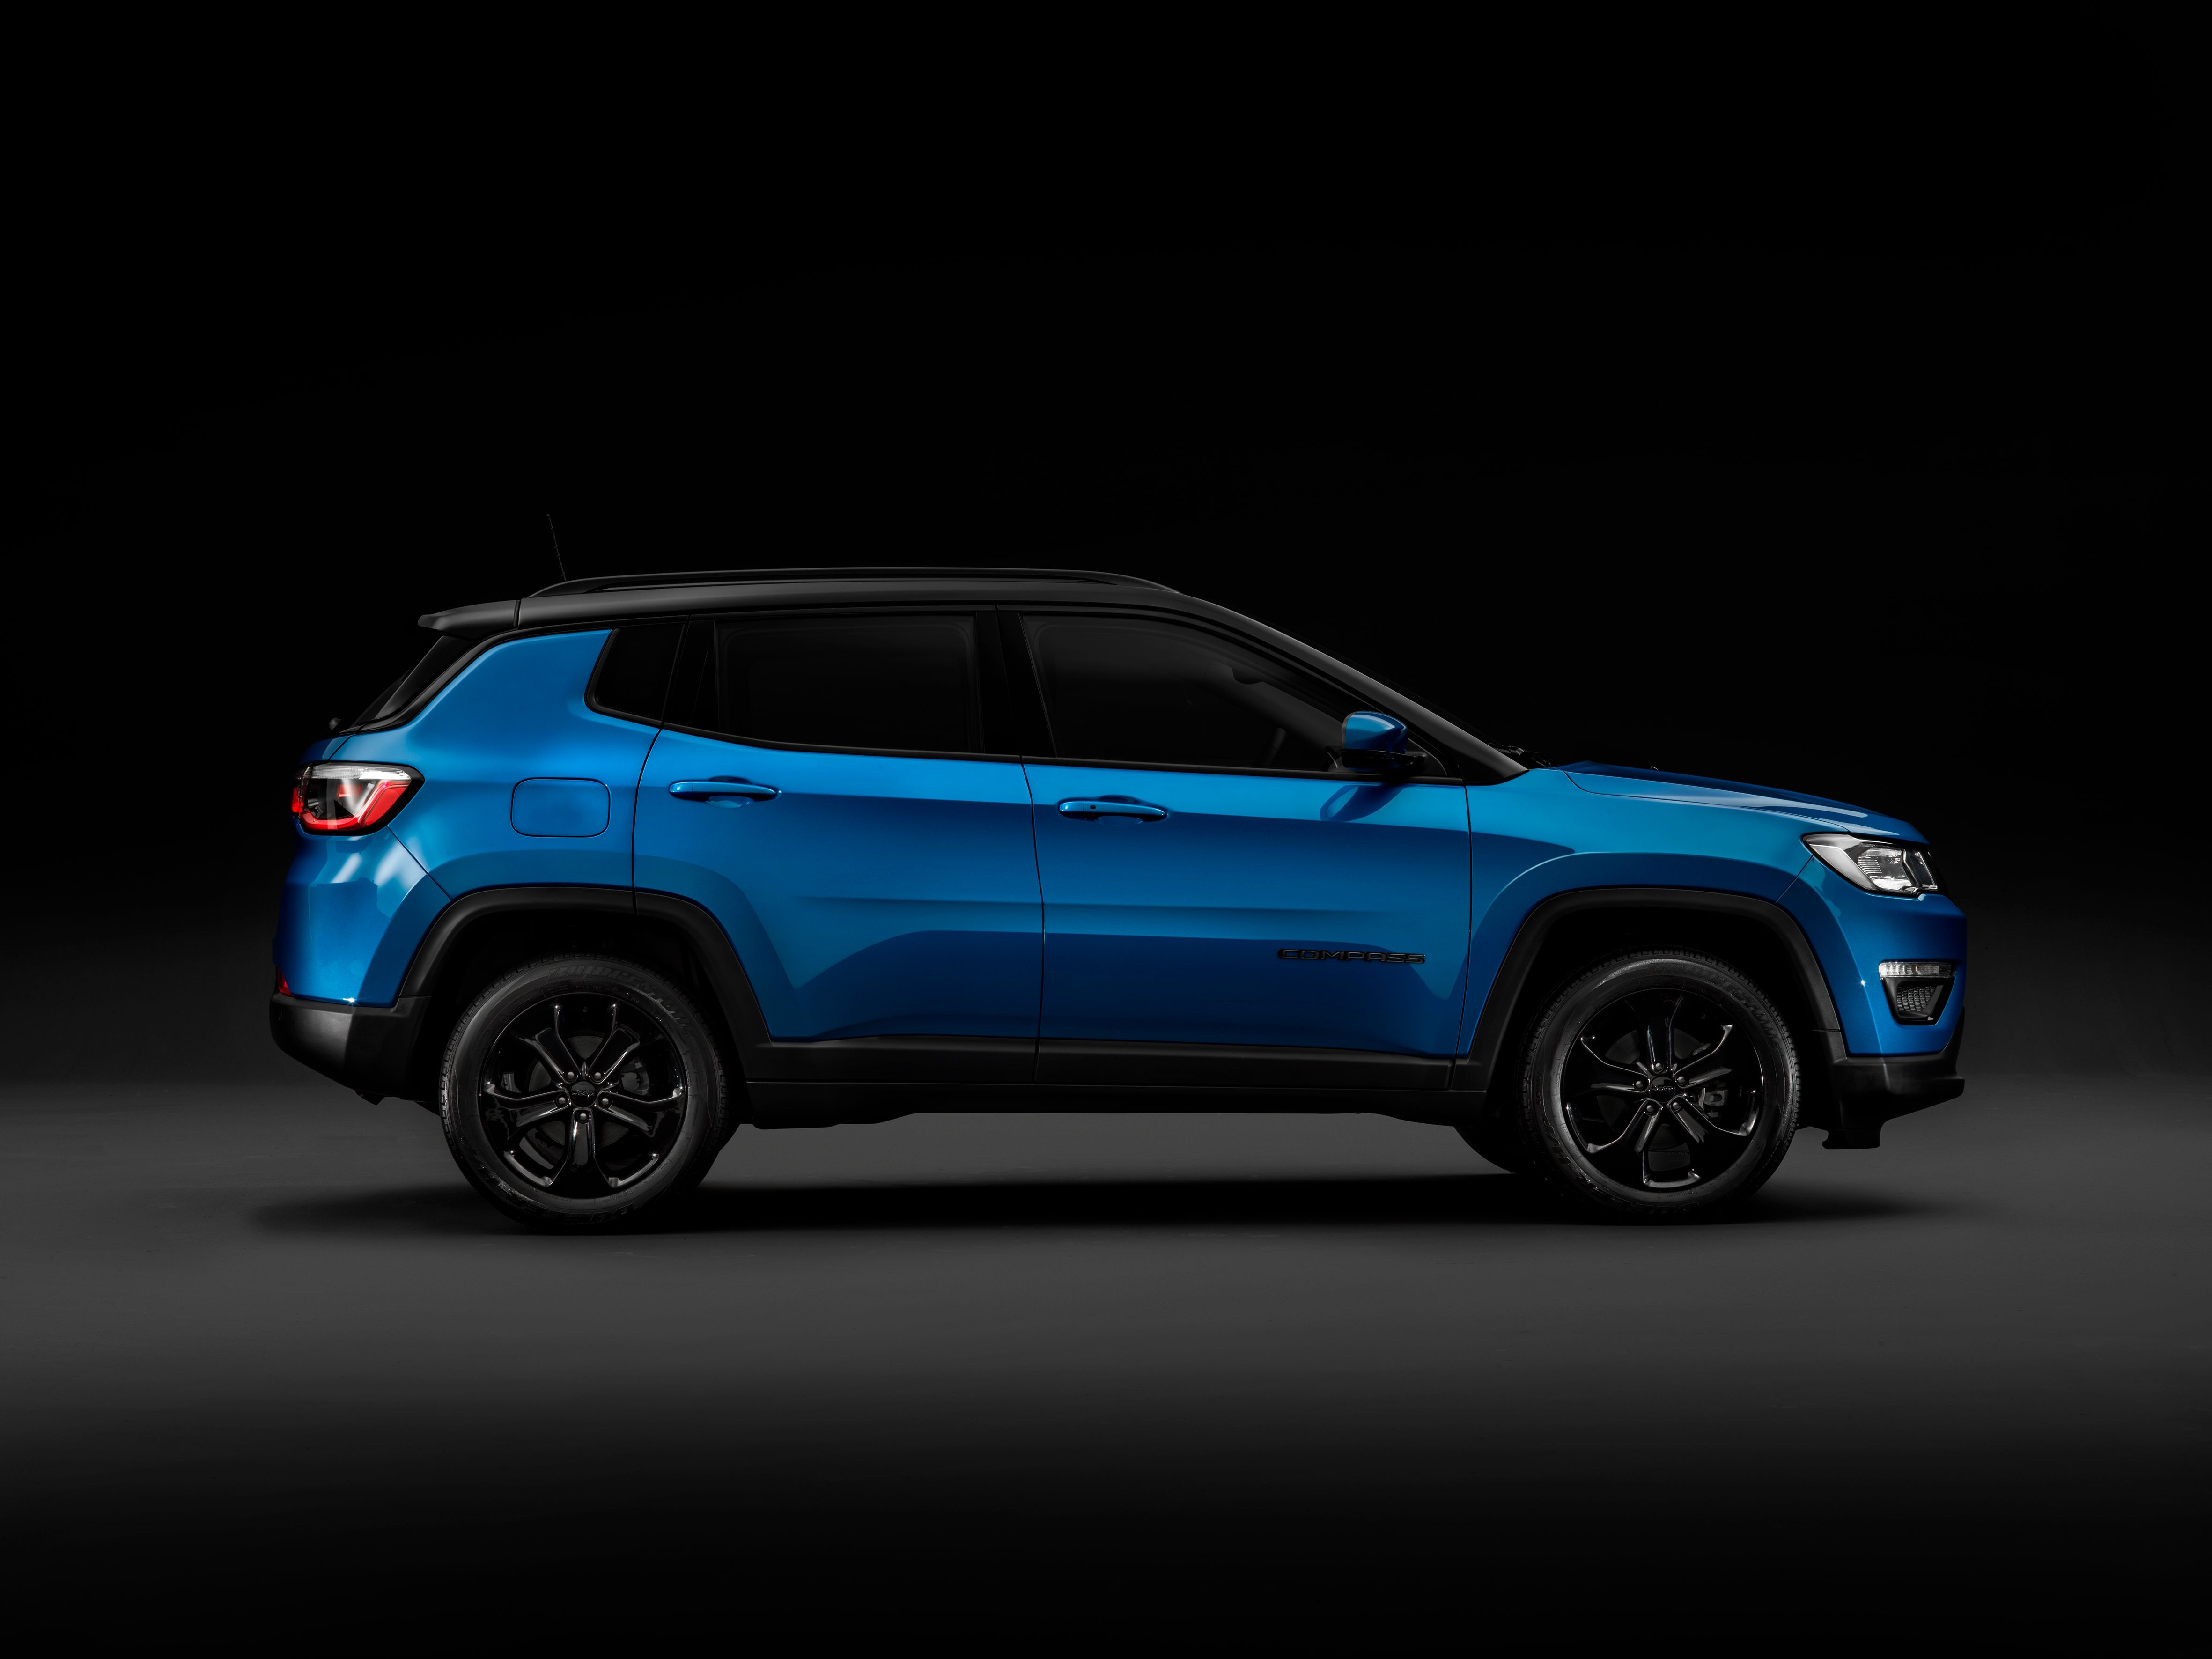 2019 Jeep Heads to Geneva With Long Line of Special Edition Models